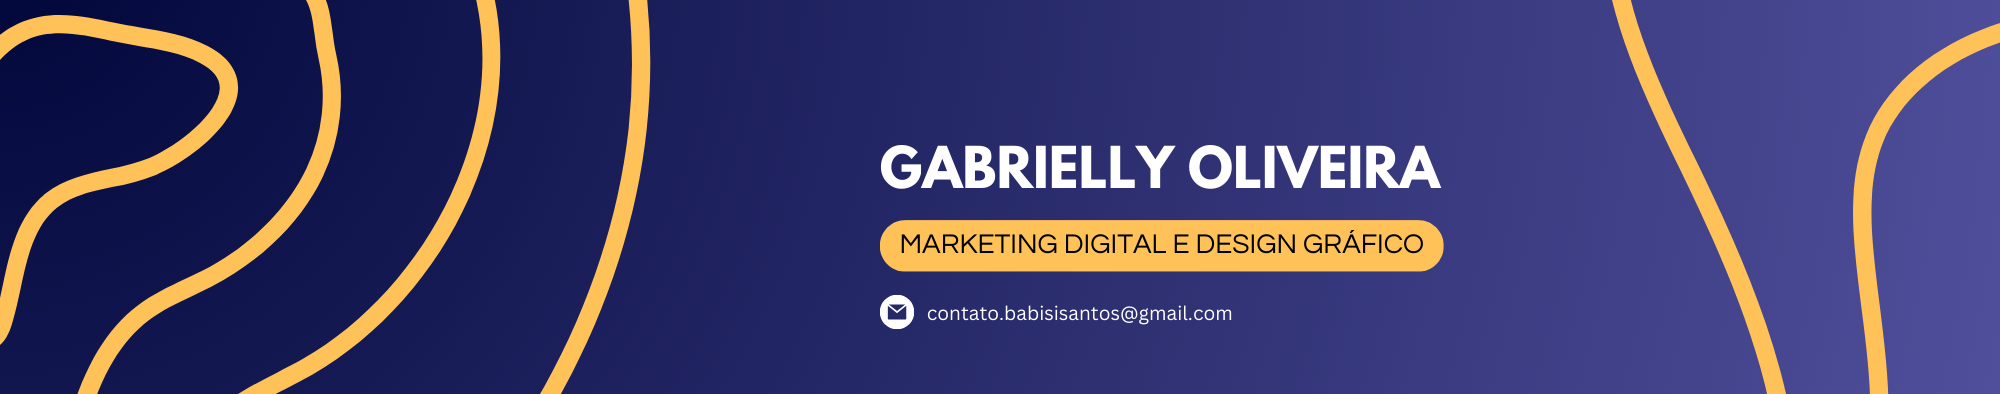 Gabrielly Oliveira's profile banner